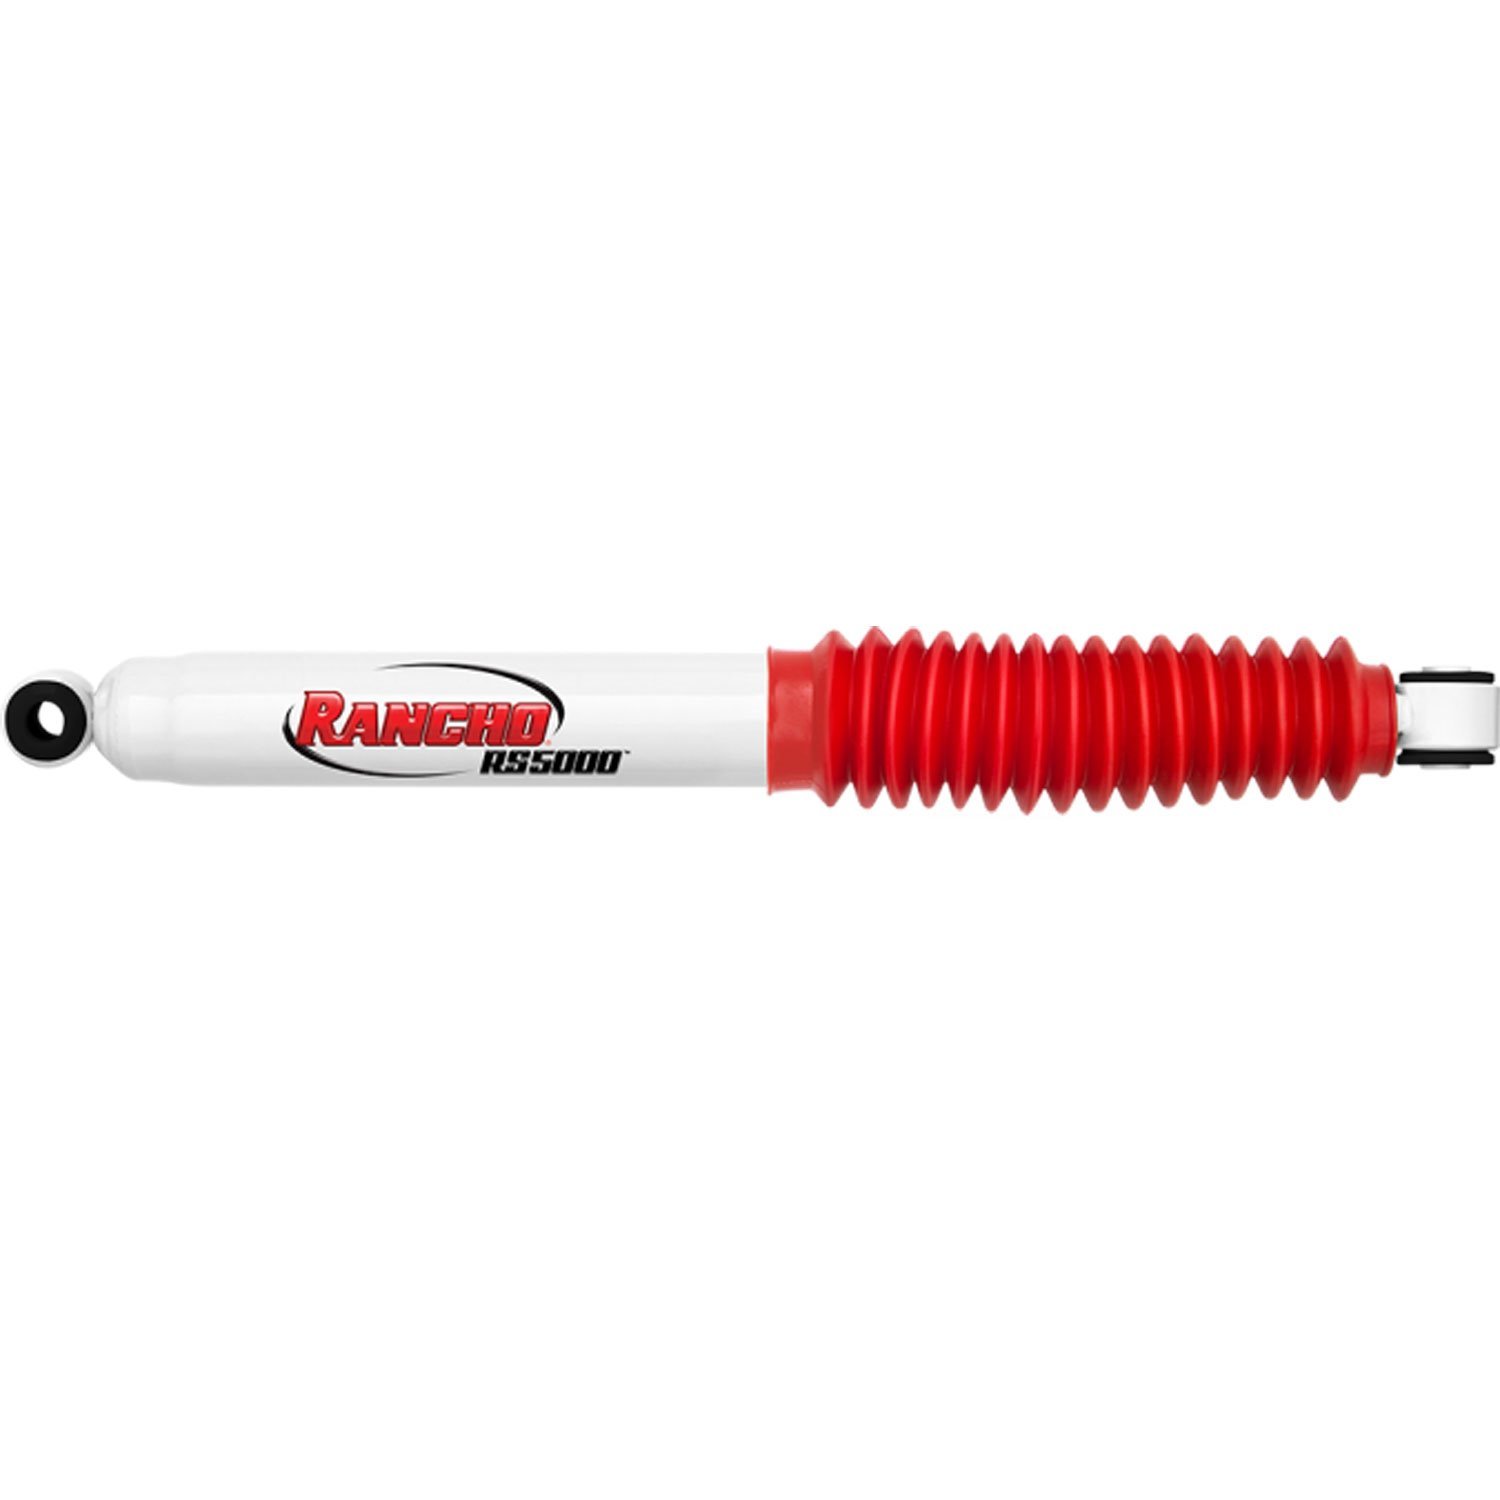 RS5000 Steering Stabilizer Fits Ford F-Series Super Duty